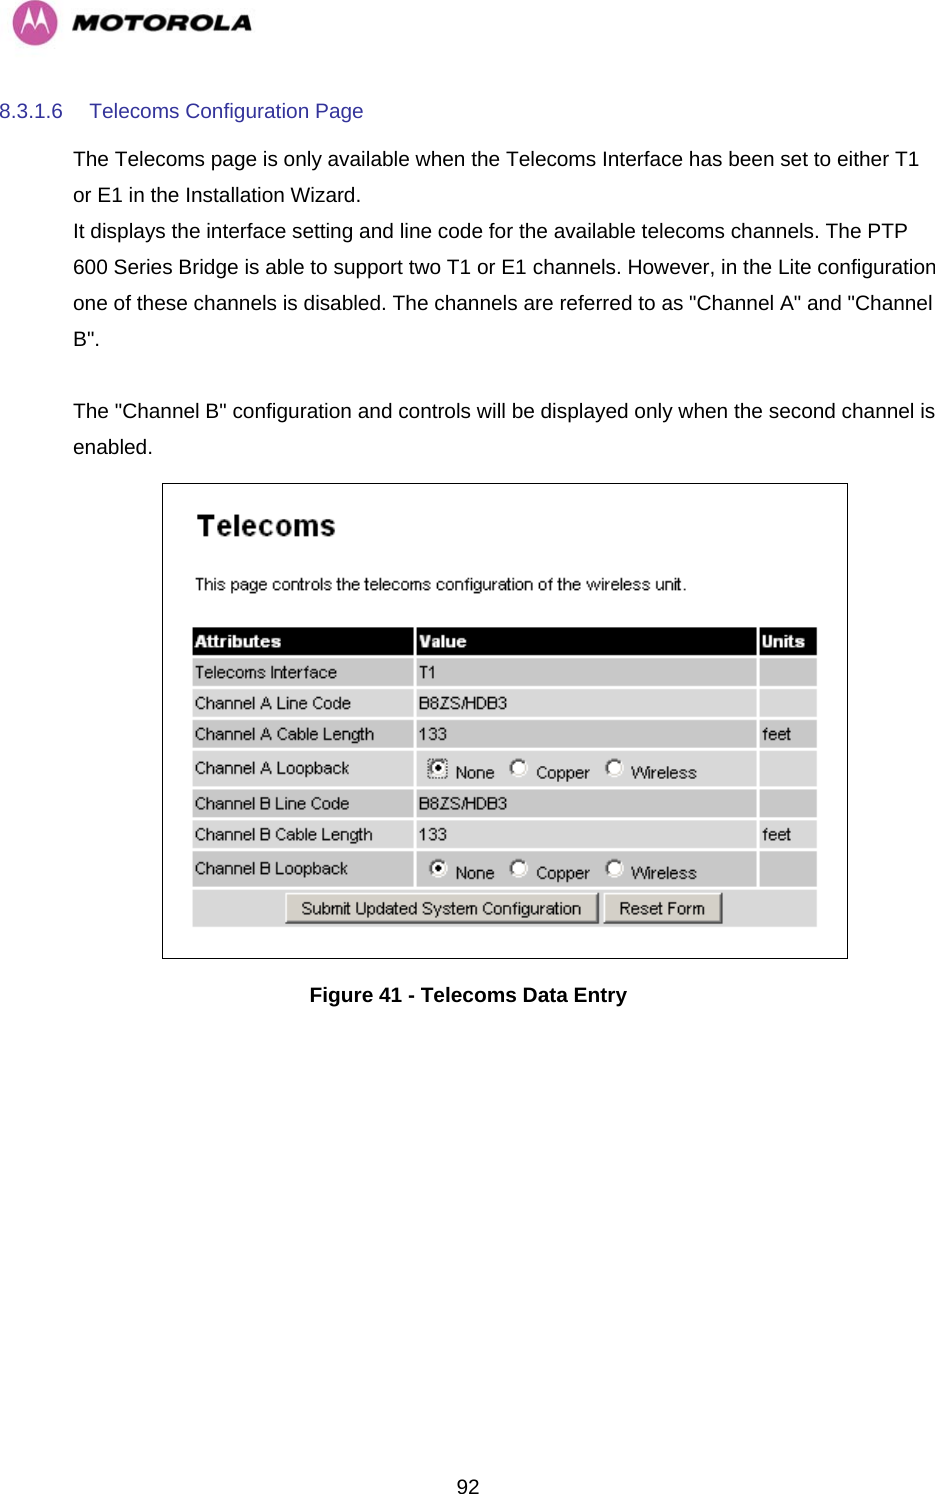   928.3.1.6  Telecoms Configuration Page The Telecoms page is only available when the Telecoms Interface has been set to either T1 or E1 in the Installation Wizard.  It displays the interface setting and line code for the available telecoms channels. The PTP 600 Series Bridge is able to support two T1 or E1 channels. However, in the Lite configuration one of these channels is disabled. The channels are referred to as &quot;Channel A&quot; and &quot;Channel B&quot;.   The &quot;Channel B&quot; configuration and controls will be displayed only when the second channel is enabled.   Figure 41 - Telecoms Data Entry 